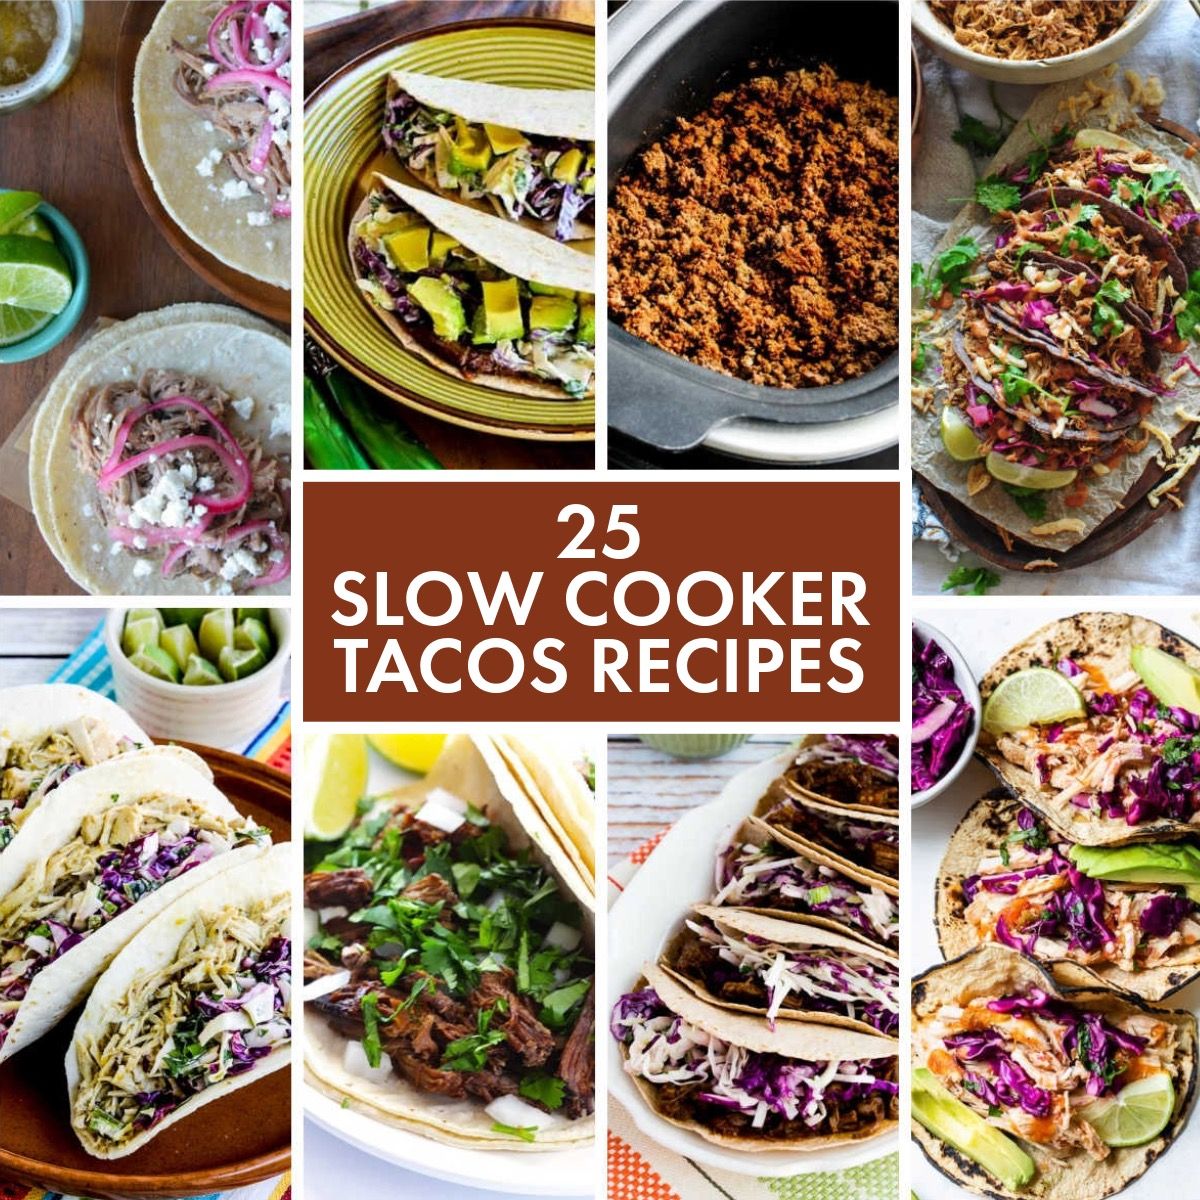 25 Slow Cooker Tacos Recipes text overlay collage showing featured recipes.